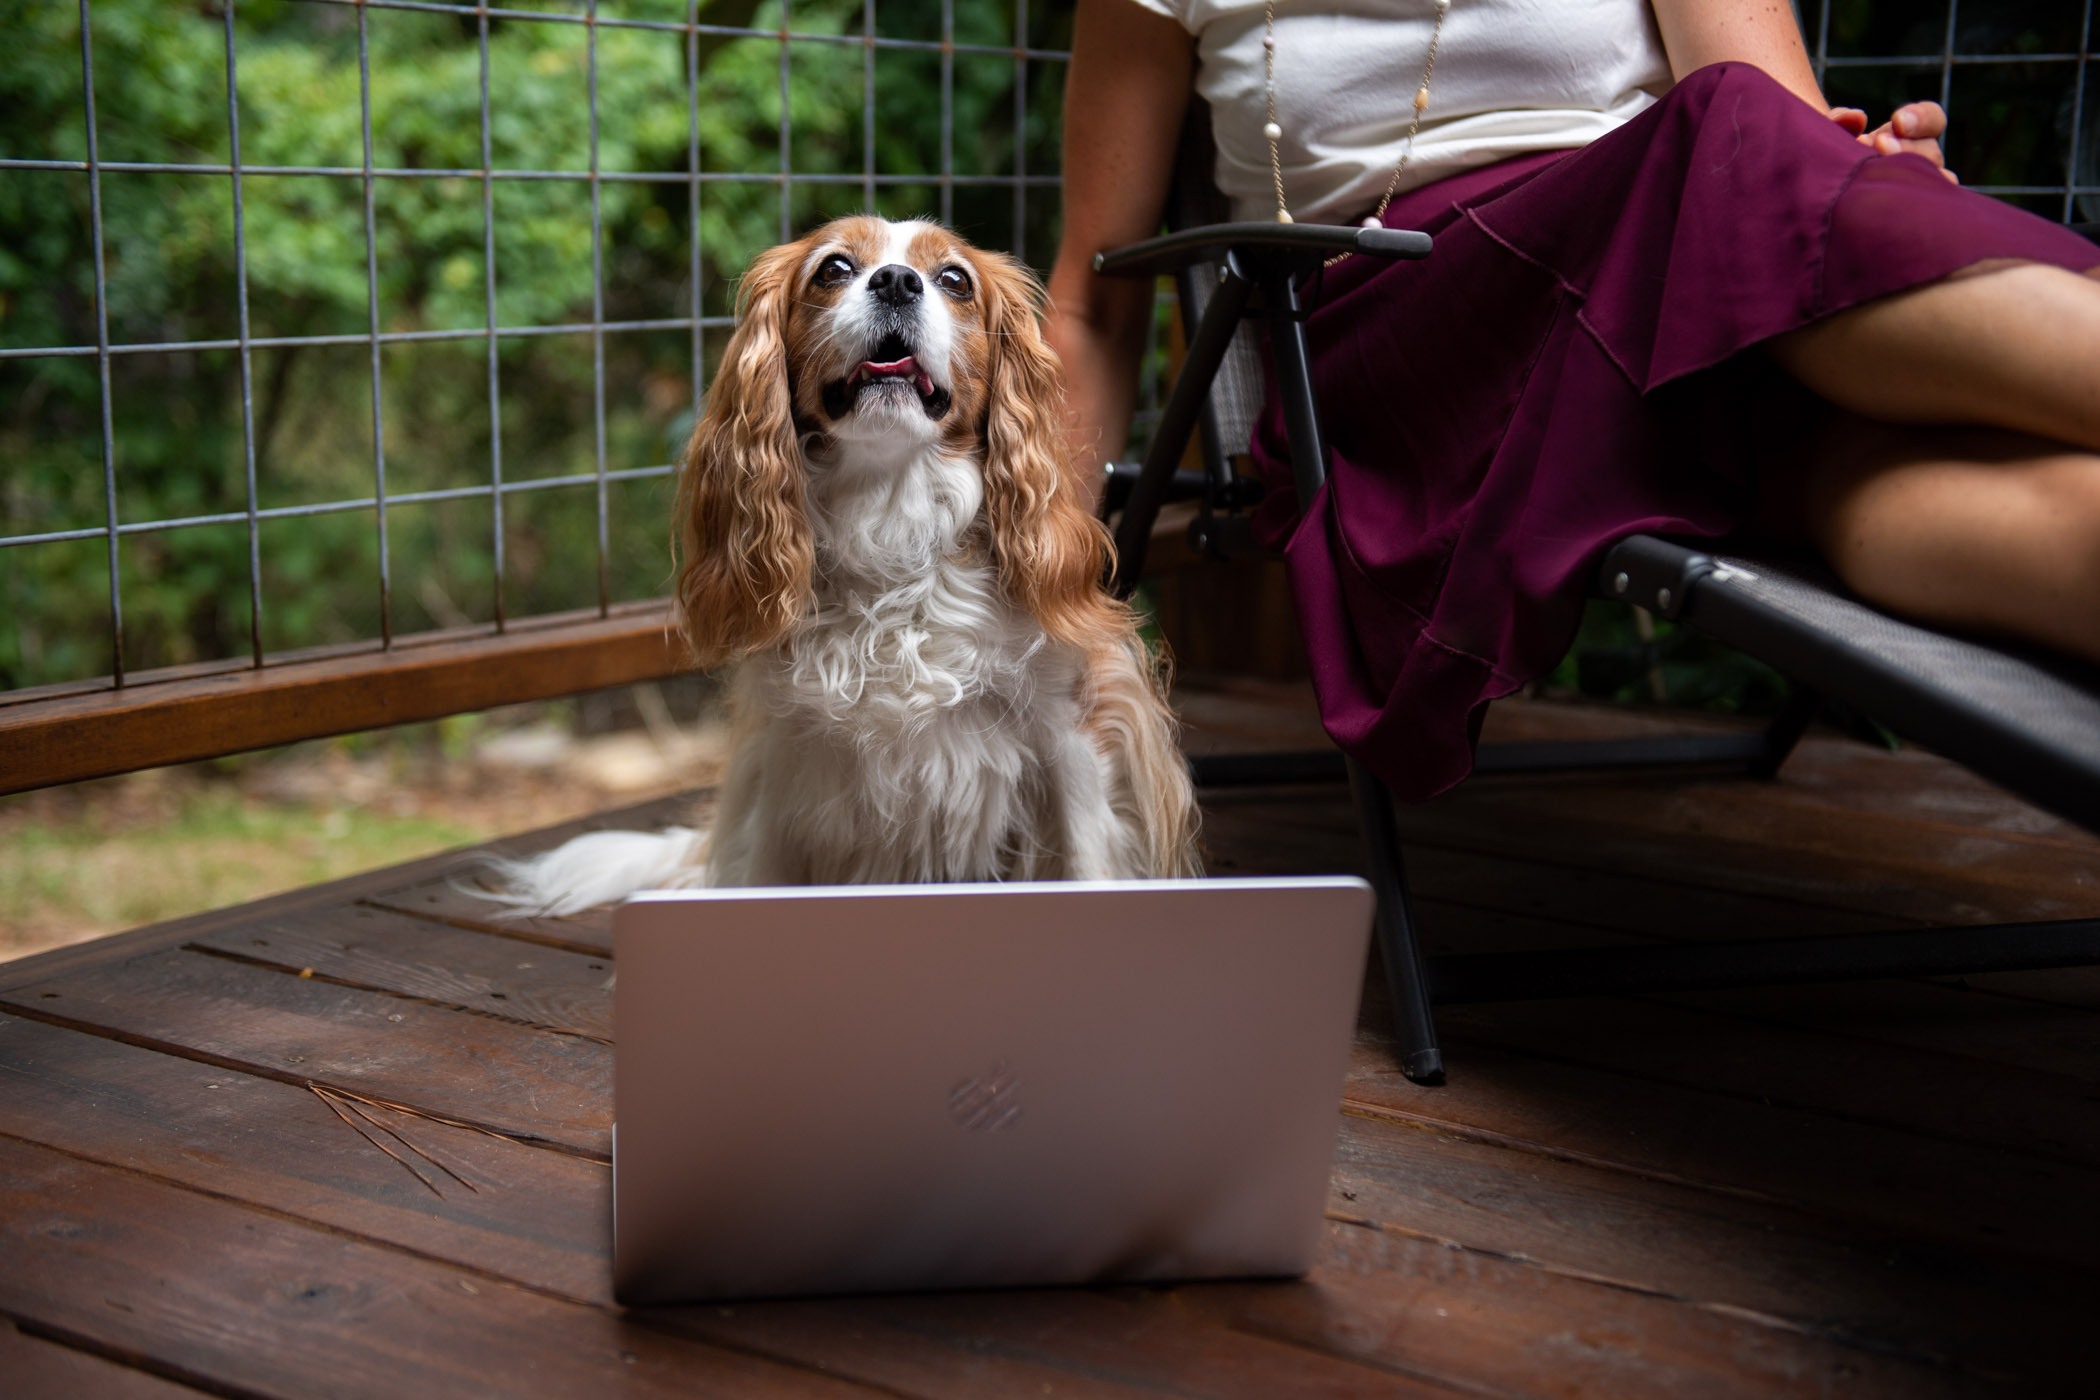 Franklin, a smiling cocker spaniel, poses behind a silver laptop on set of the newest stock photoshoot for MSU online.